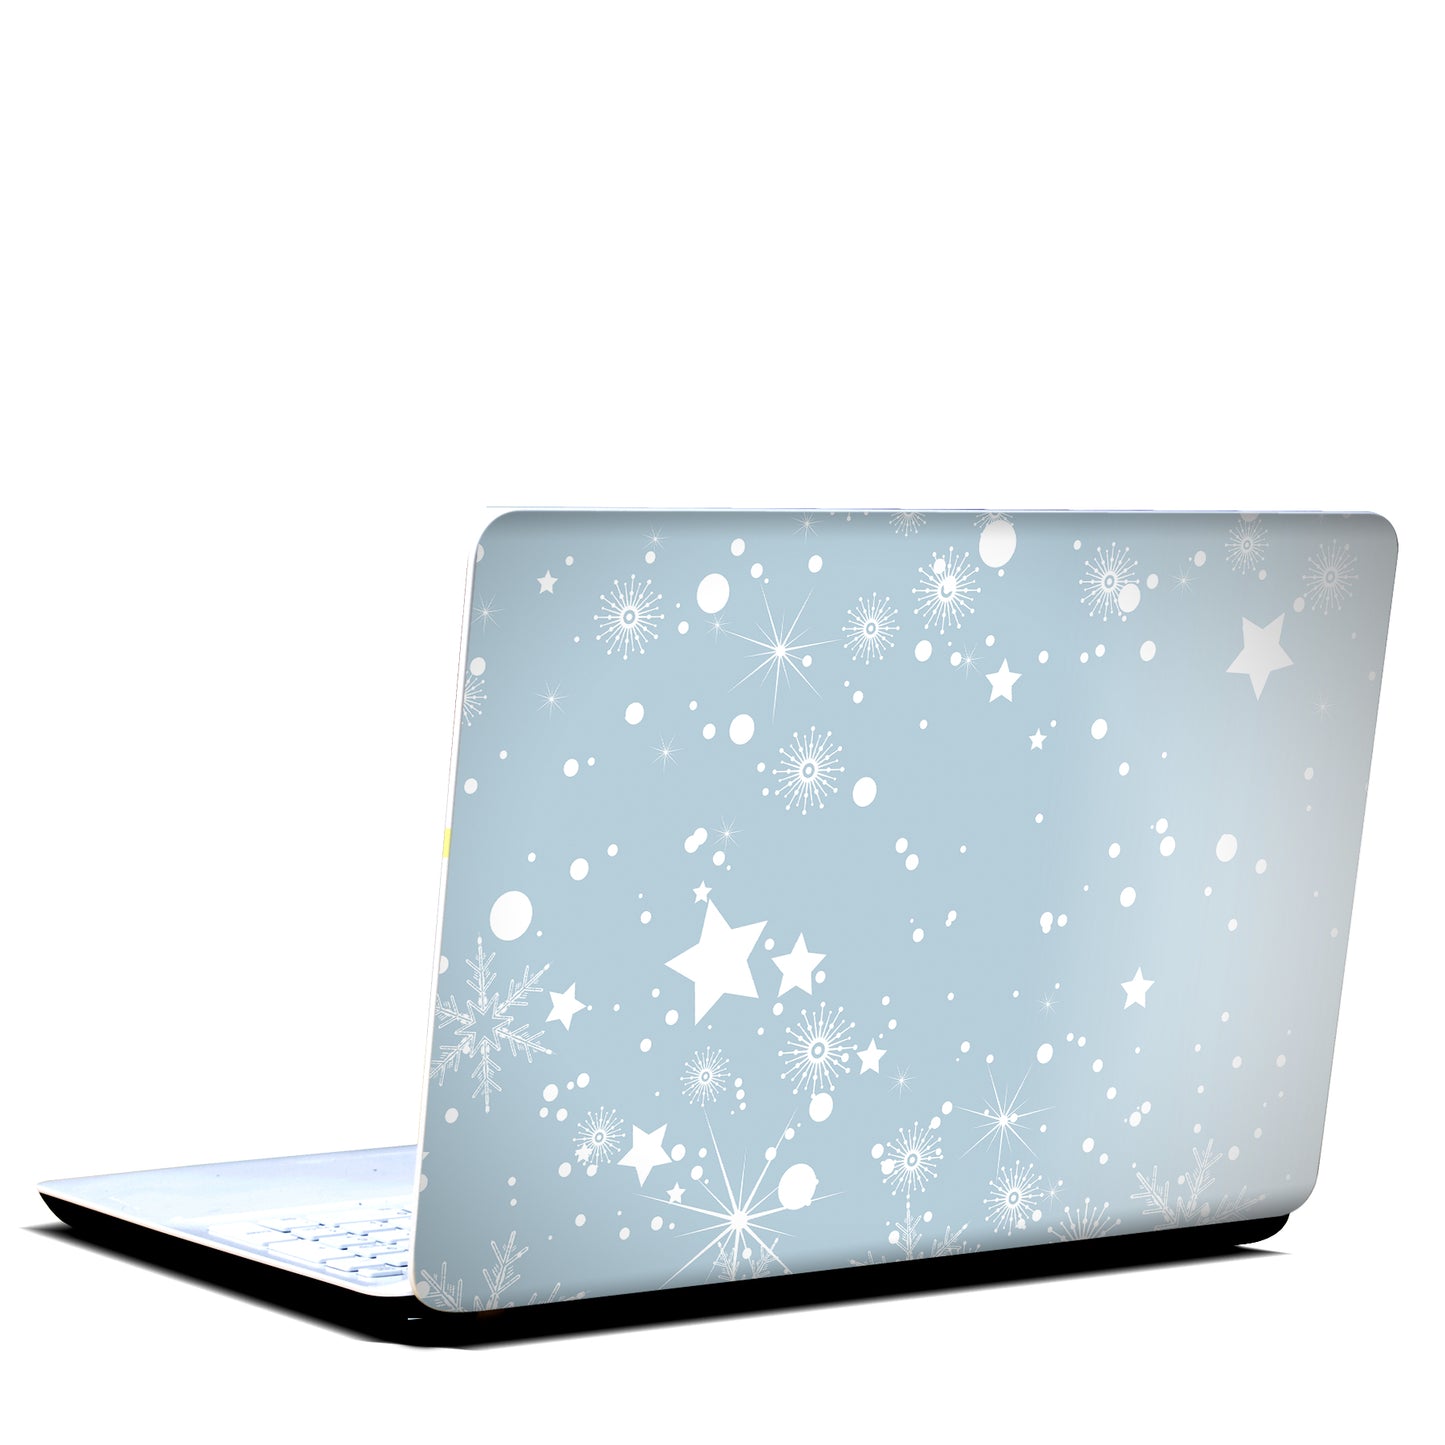 iberry's Vinyl Laptop Skin Sticker Collection for Dell, Hp, Toshiba, Acer, Asus & All Models (Upto 15.6 inches) -11